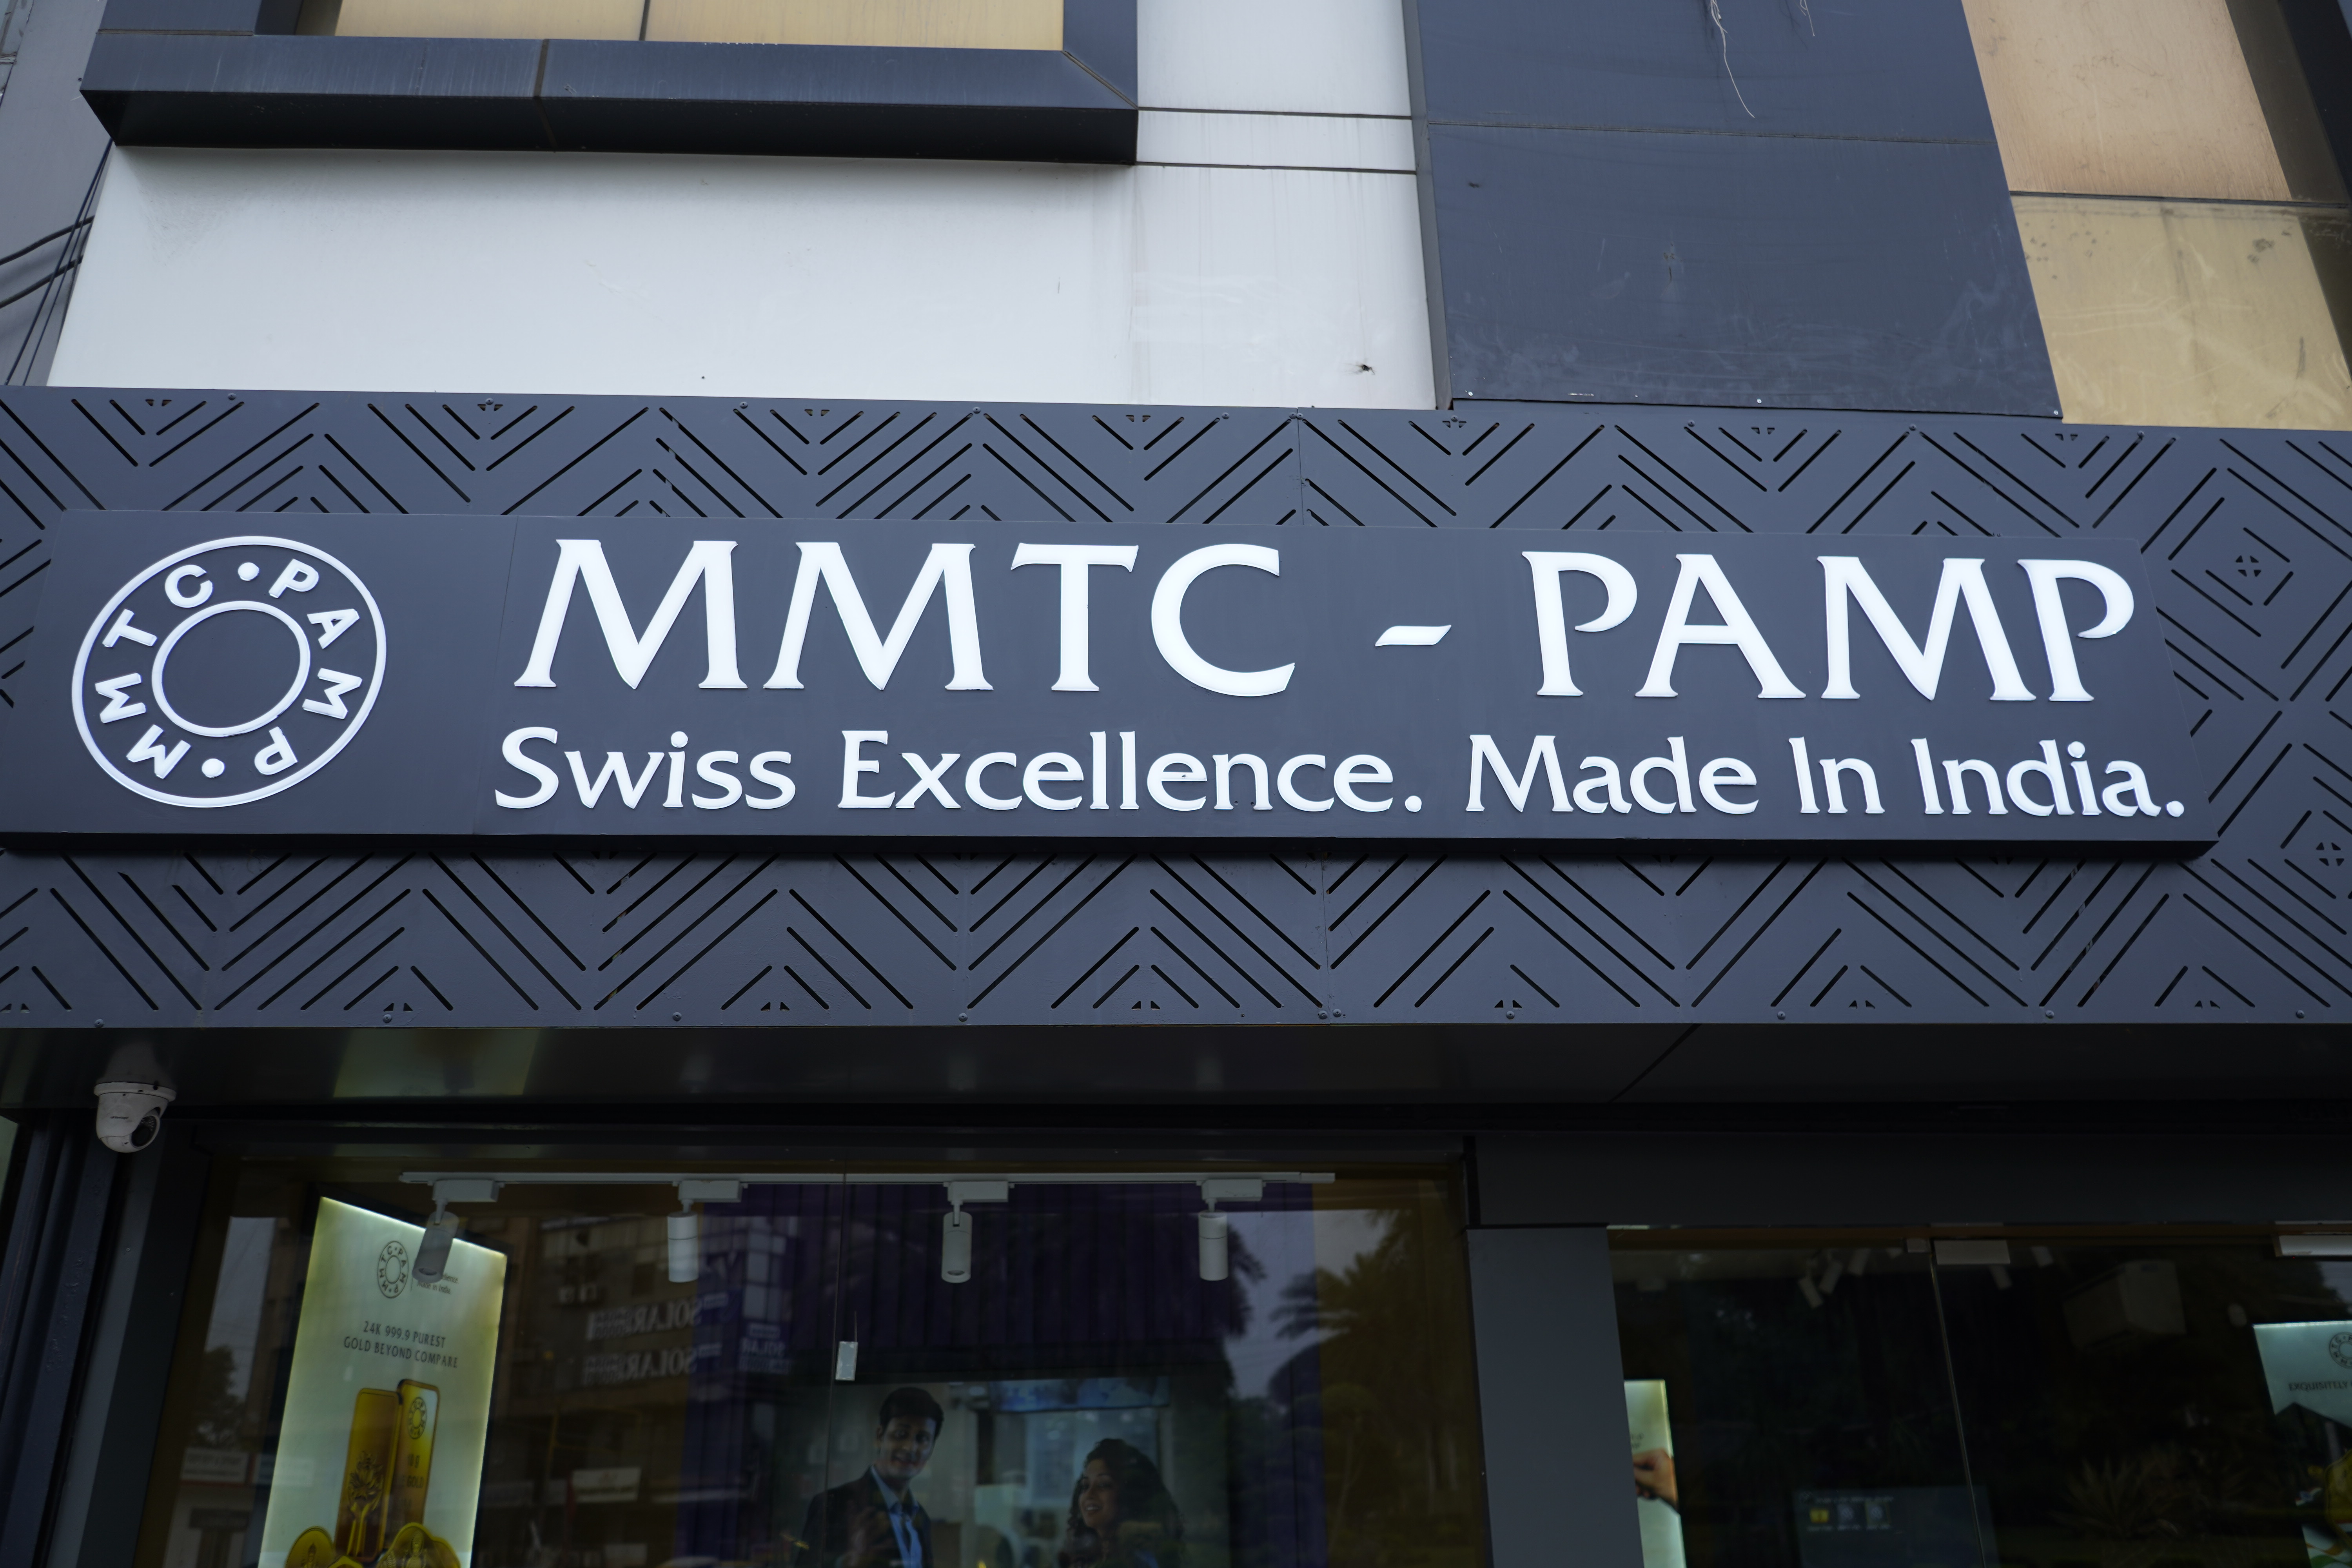 MMTC-PAMP Exclusive Brand Store - Fountain Chowk, Ludhiana Image